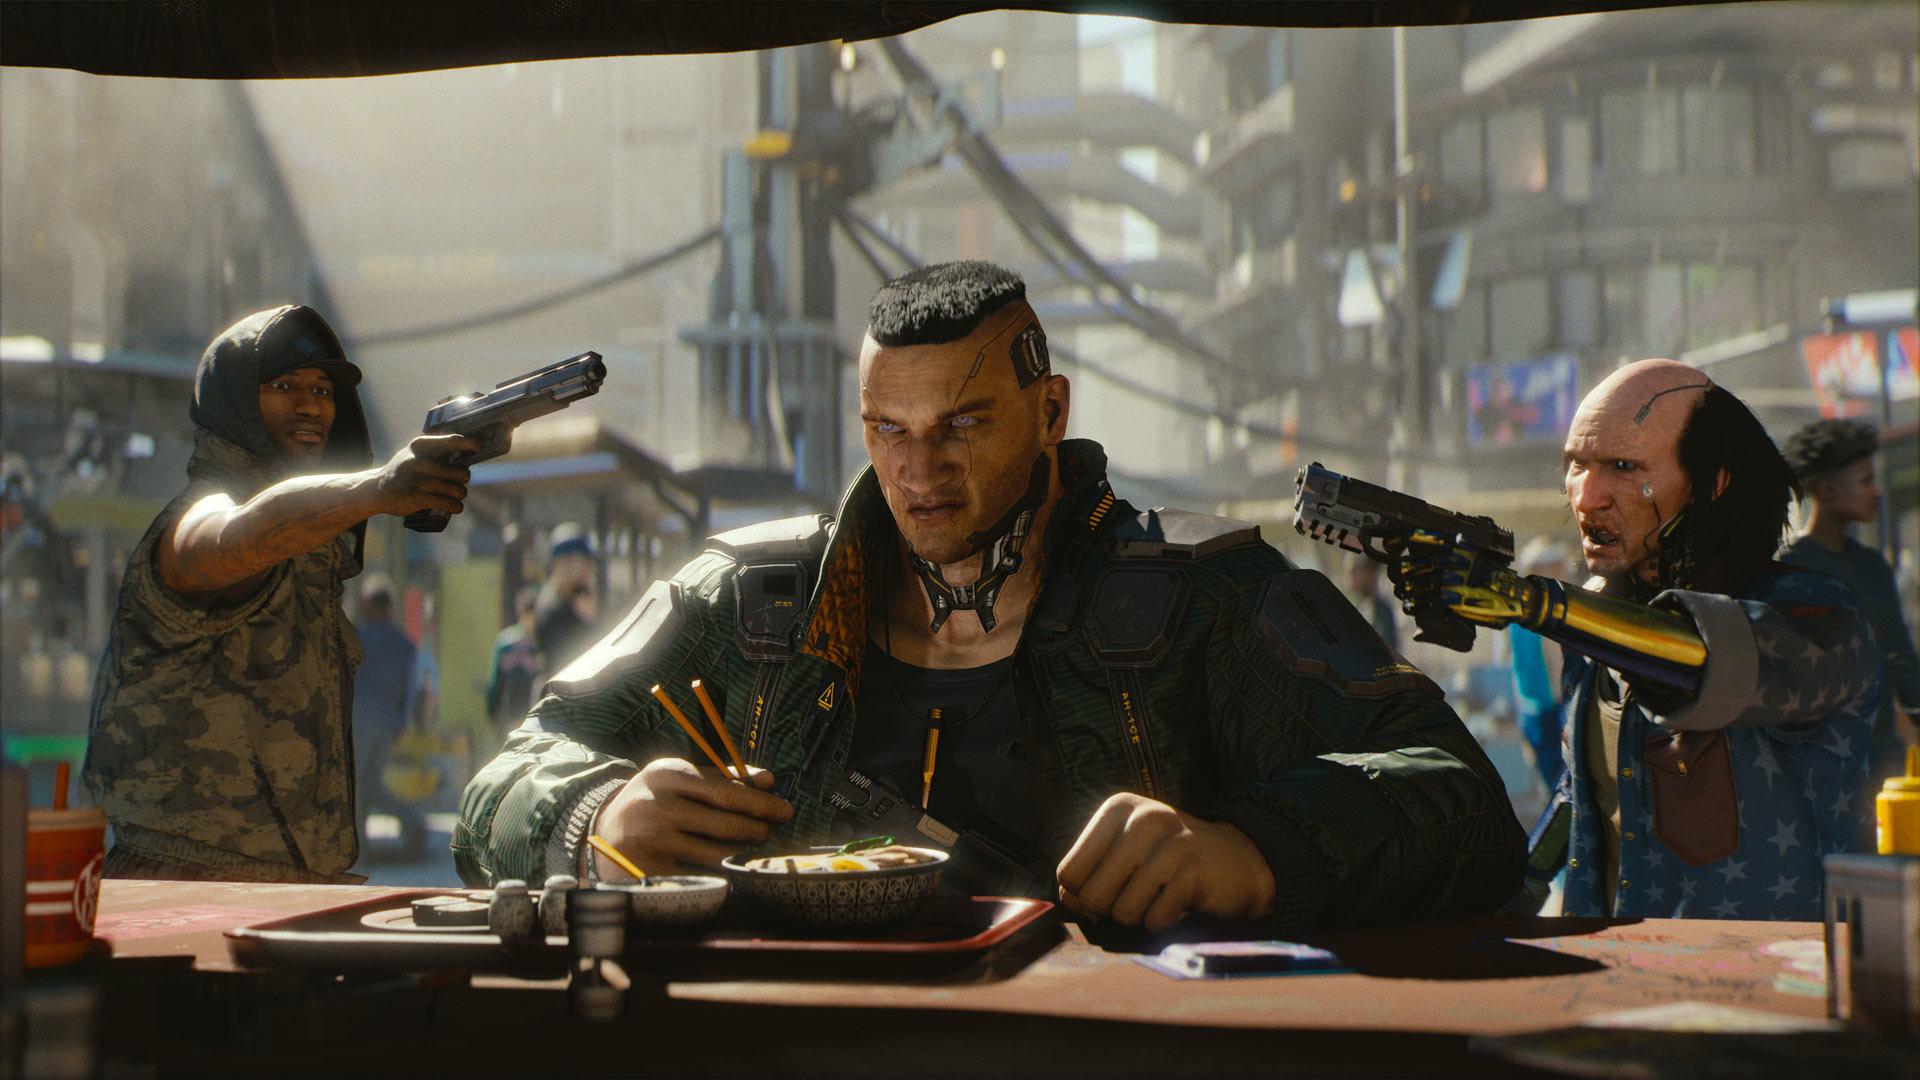 E3 2019: More Cyberpunk 2077 Gameplay Footage Coming In August